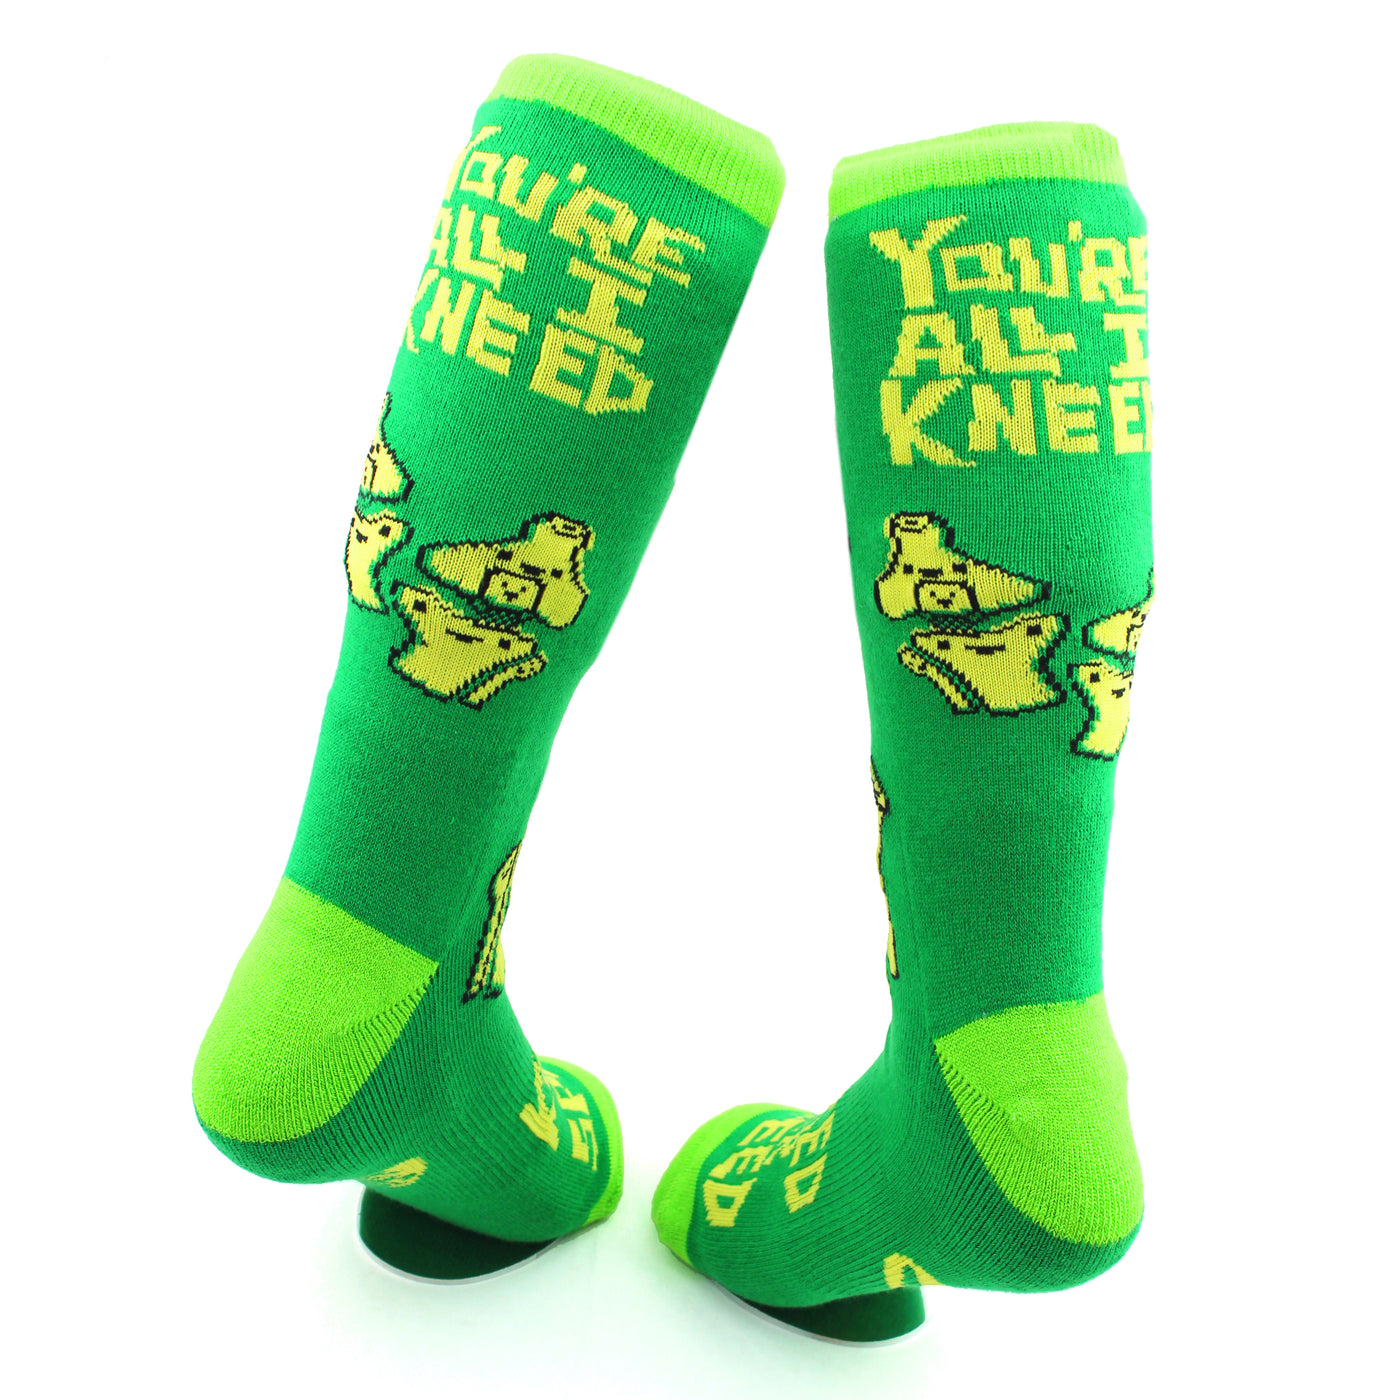 Knee Socks - Kneed for Speed Knee Replacement ACL Surgery Gift - I Heart Guts